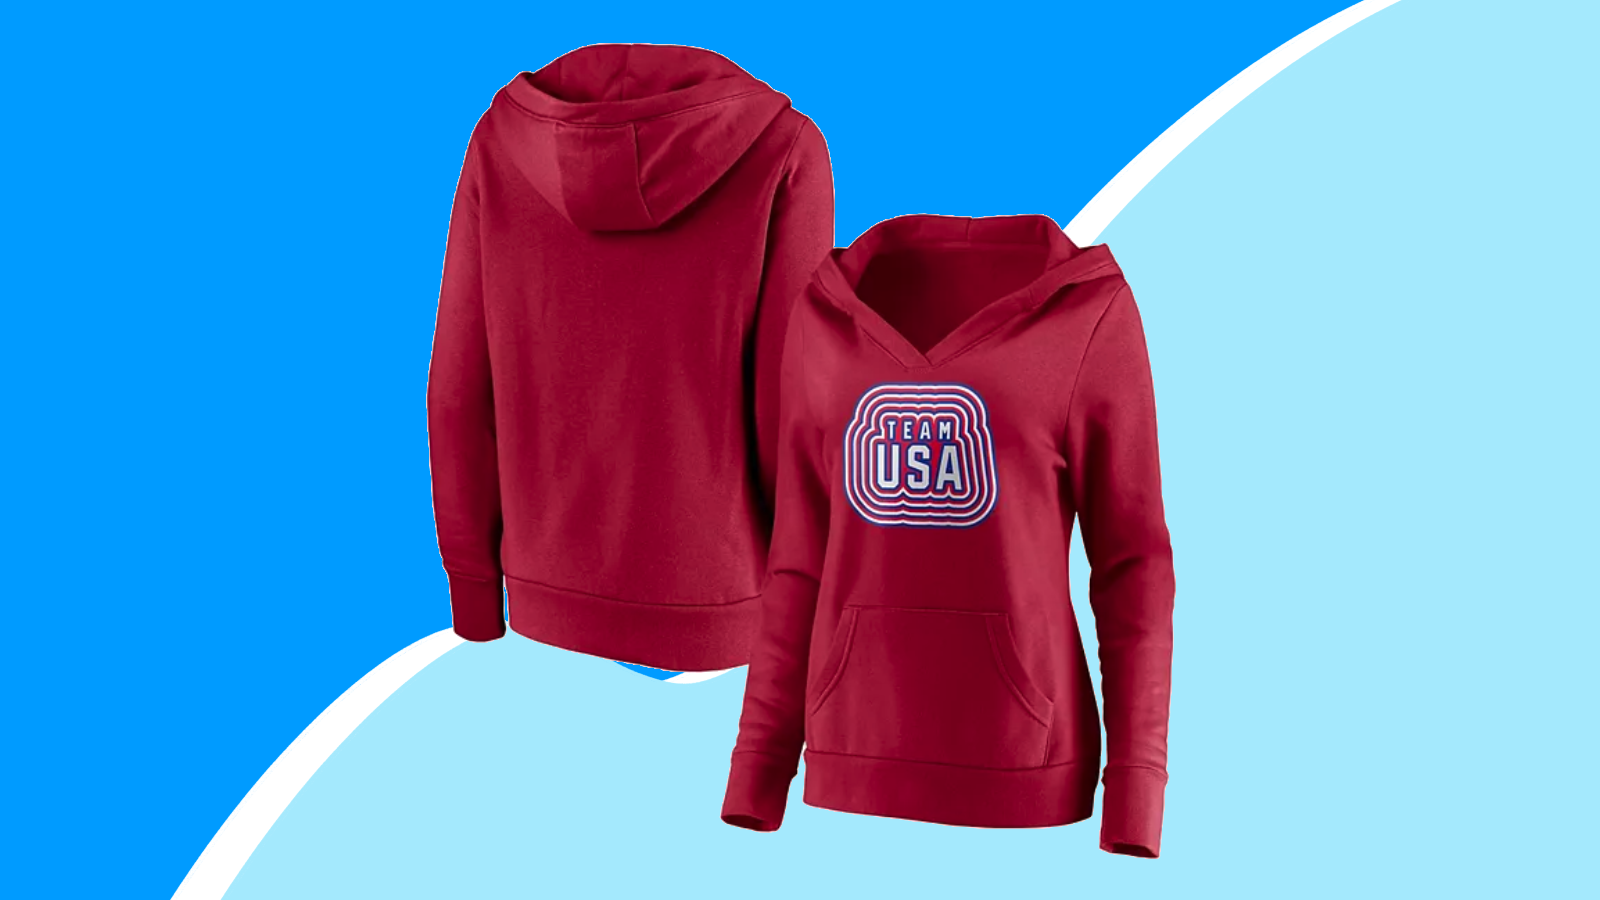 Team USA Olympic gear is here—cheer on your favorite athletes with these patriotic pieces